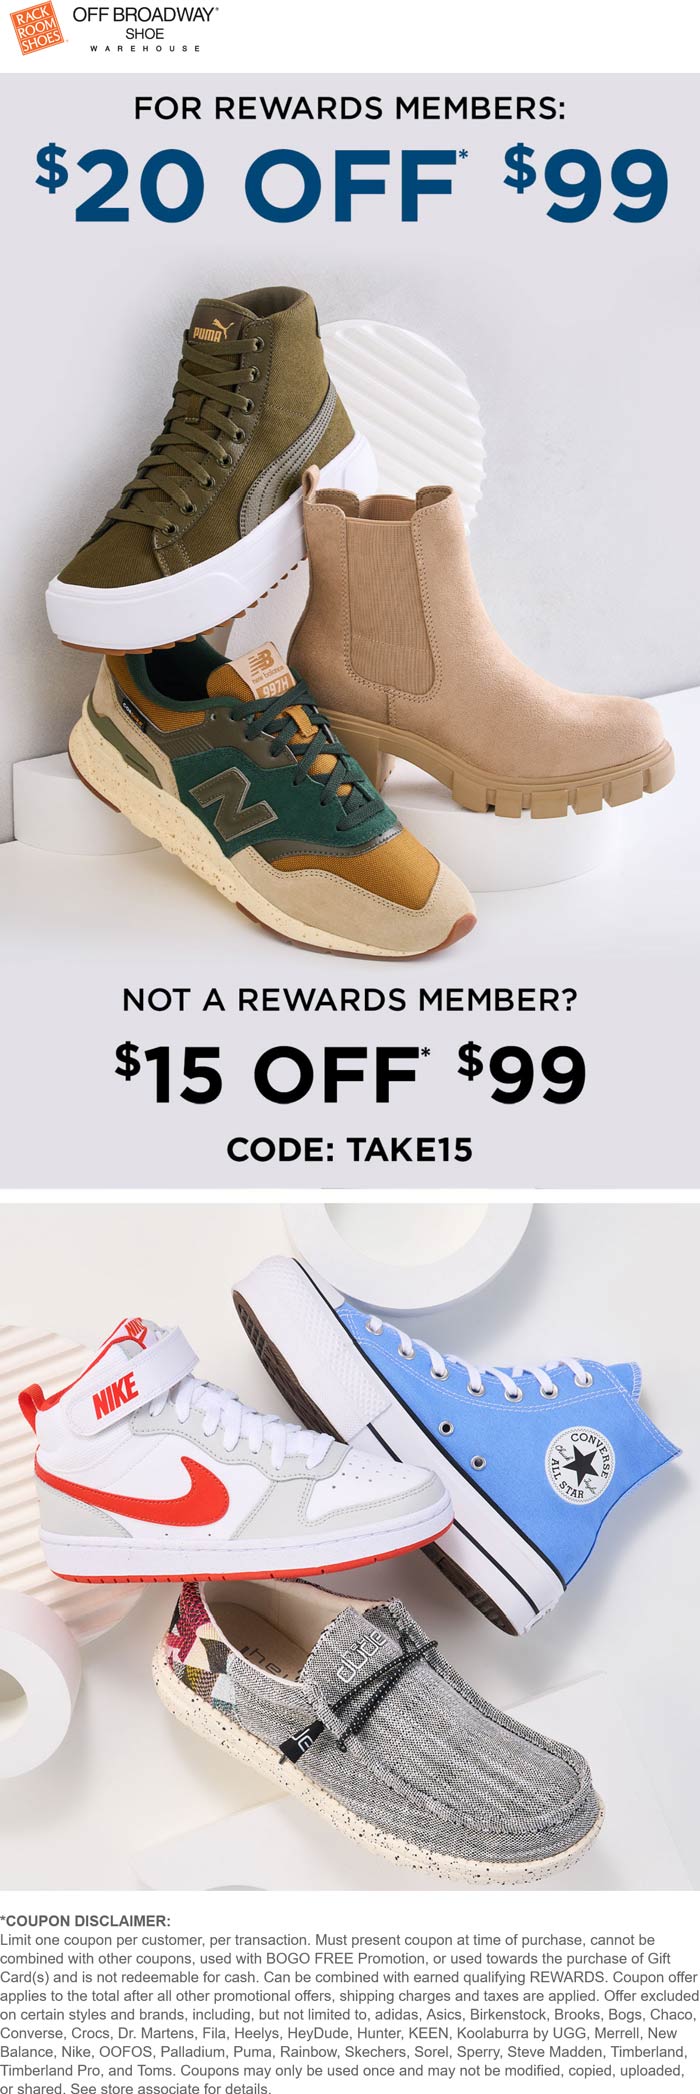 Rack Room Shoes stores Coupon  $15 off $99 & more at Rack Room Shoes via promo code TAKE15 #rackroomshoes 